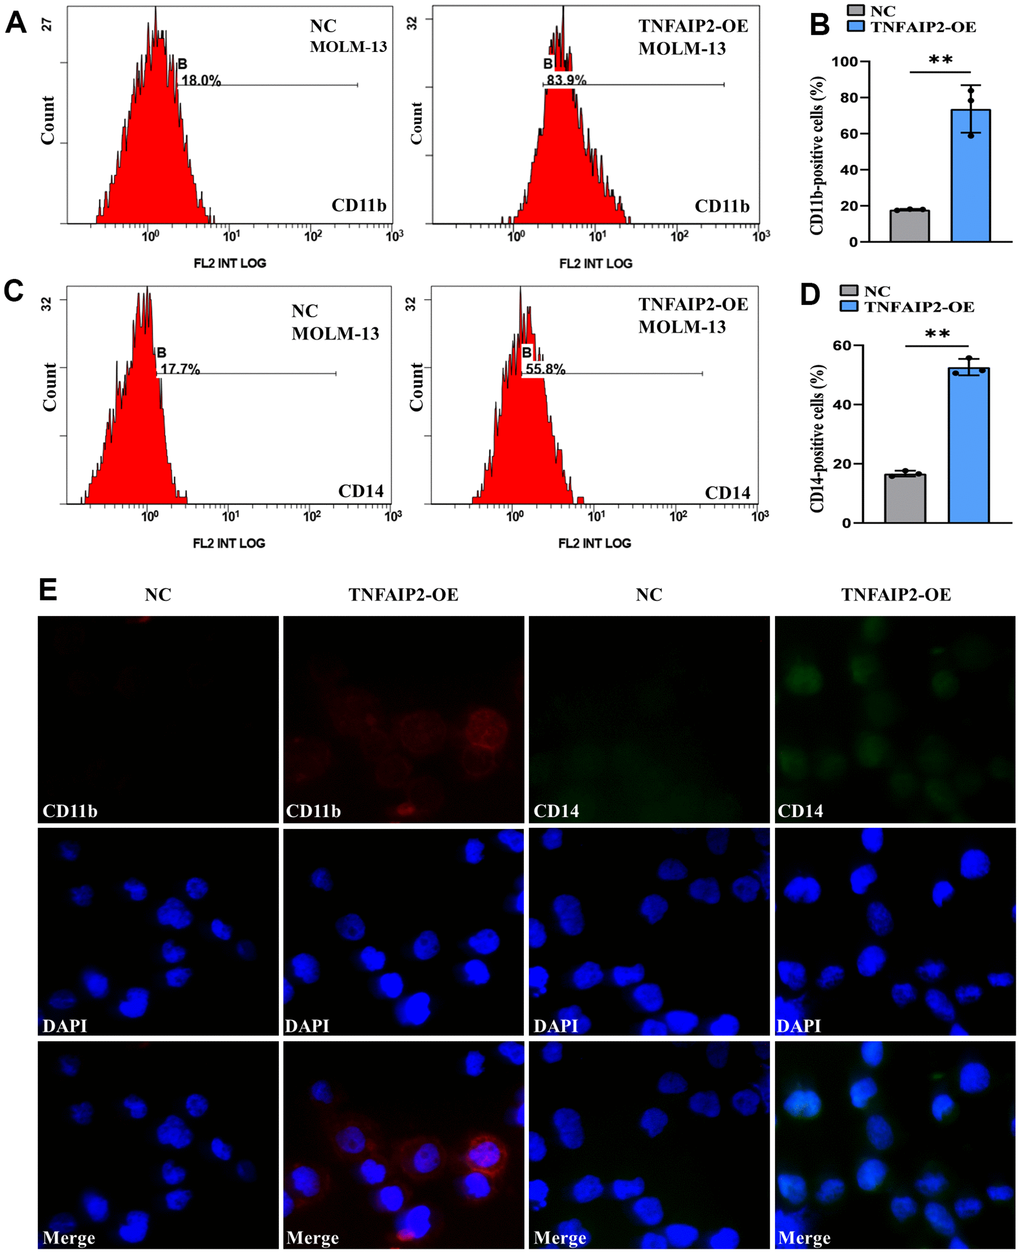 Forced expression of TNFAIP2 significantly induced the differentiation of MOLM-13 cells. (A) Flow cytometric determination of the CD11b+ cell proportion in transduced MOLM-13 cells. (B) The CD11b statistical histogram. (C) Flow cytometric determination of the CD14+ cell proportion in transduced MOLM-13 cells. (D) The CD14 statistical histogram. (E) The immunofluorescence intensity of CD11b and CD14 in transduced MOLM-13 cells. Normal distribution, t test, ** P 